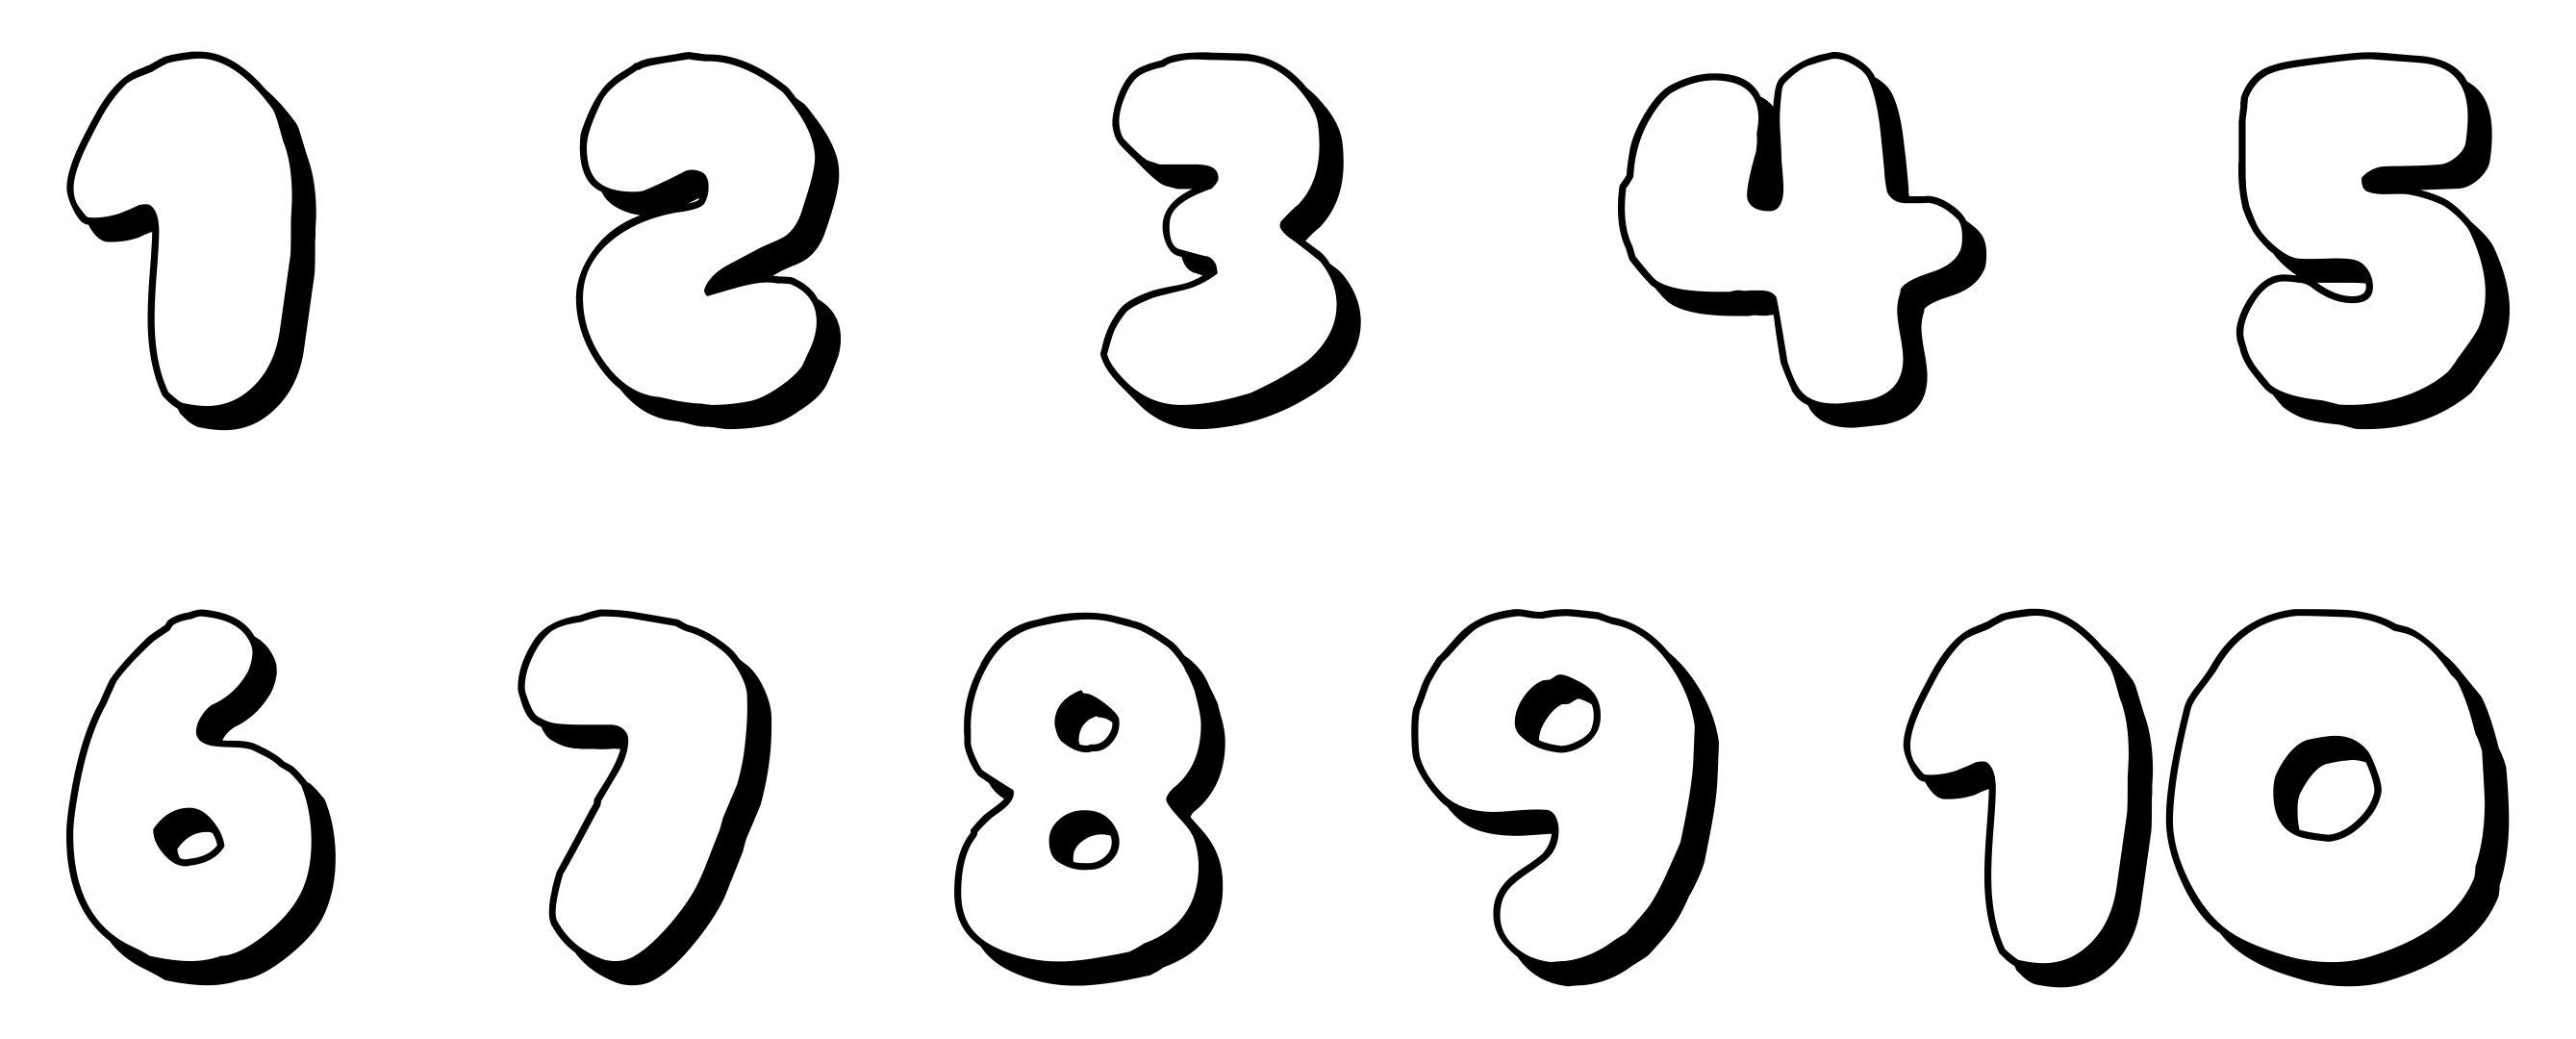 Free Printable Bubble Numbers 1-10 - Printable Templates